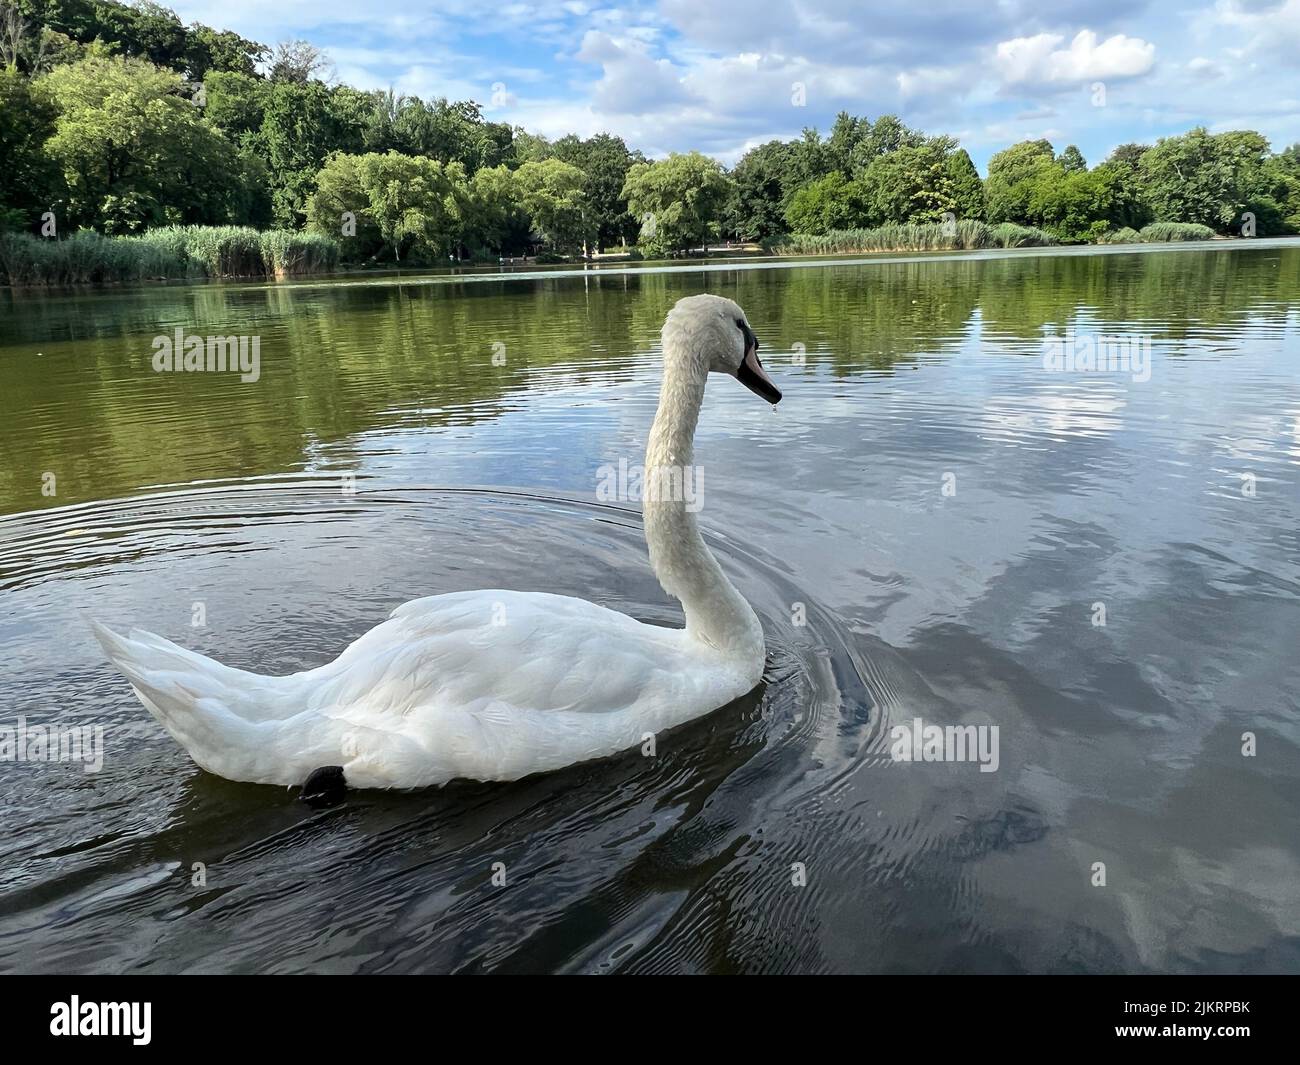 Single swan on the water in Prospect Park, Brooklyn, New York. Stock Photo